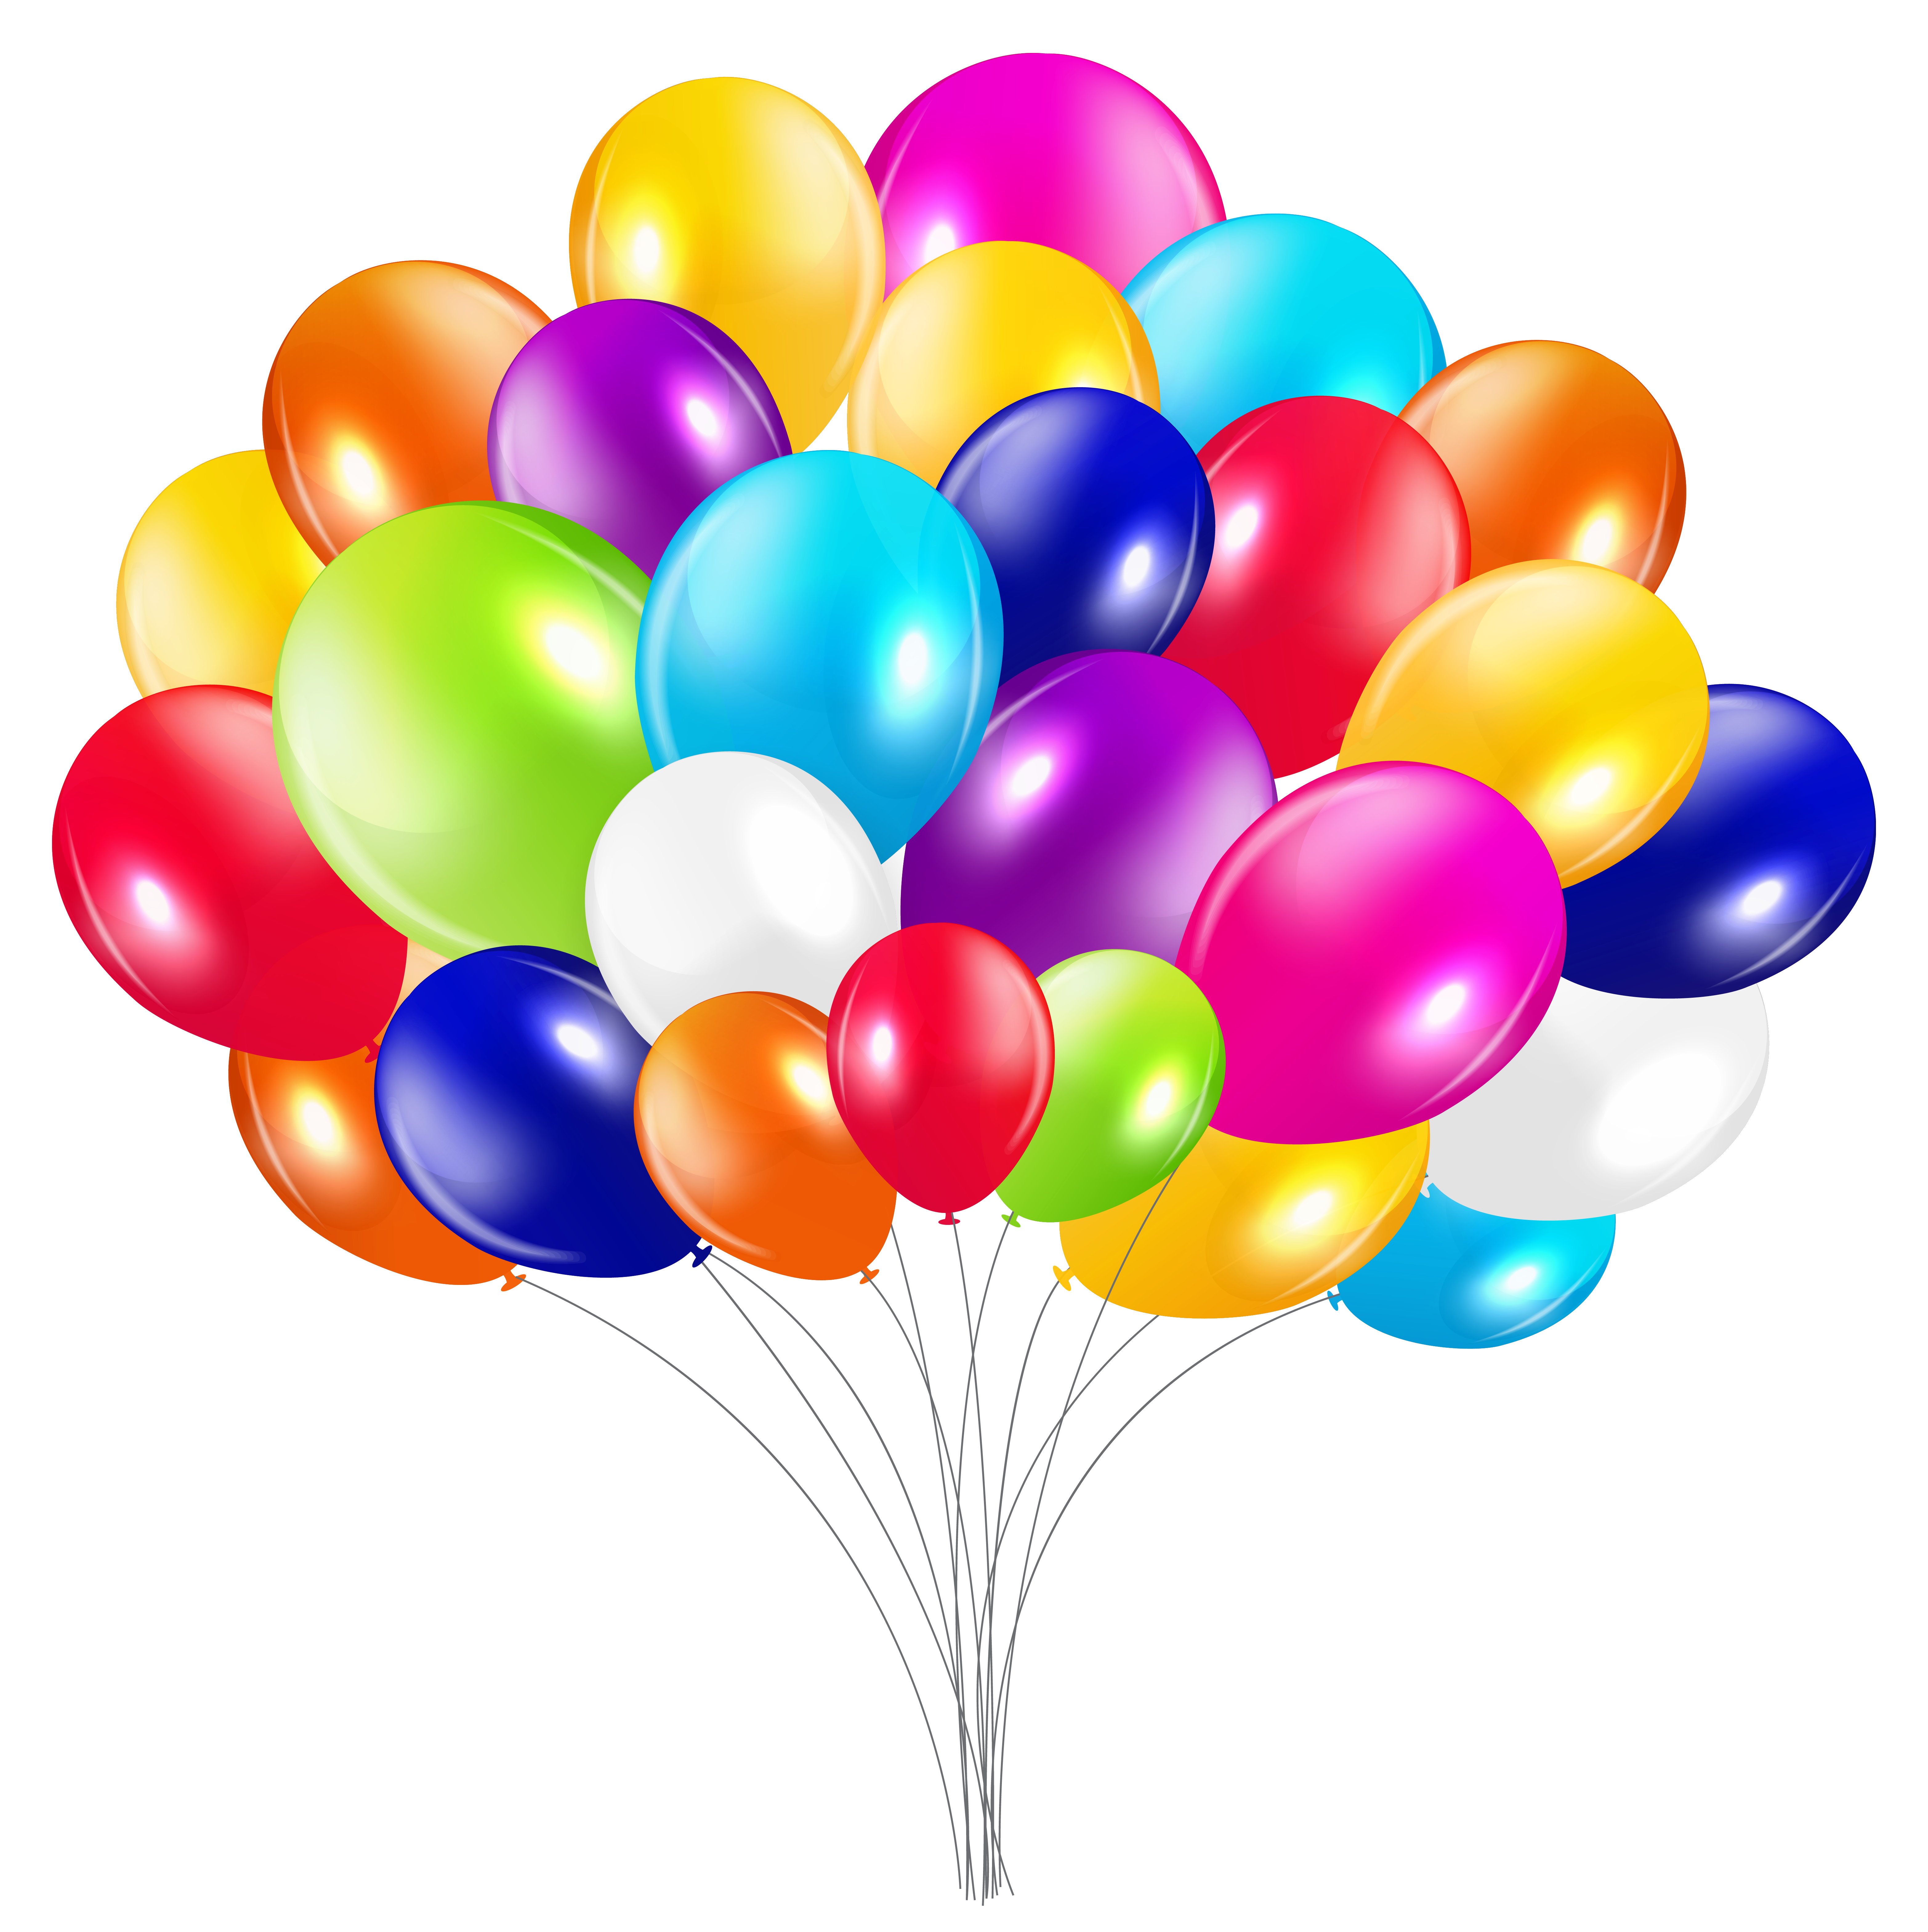 Bunch of Balloons PNG Clipart Image